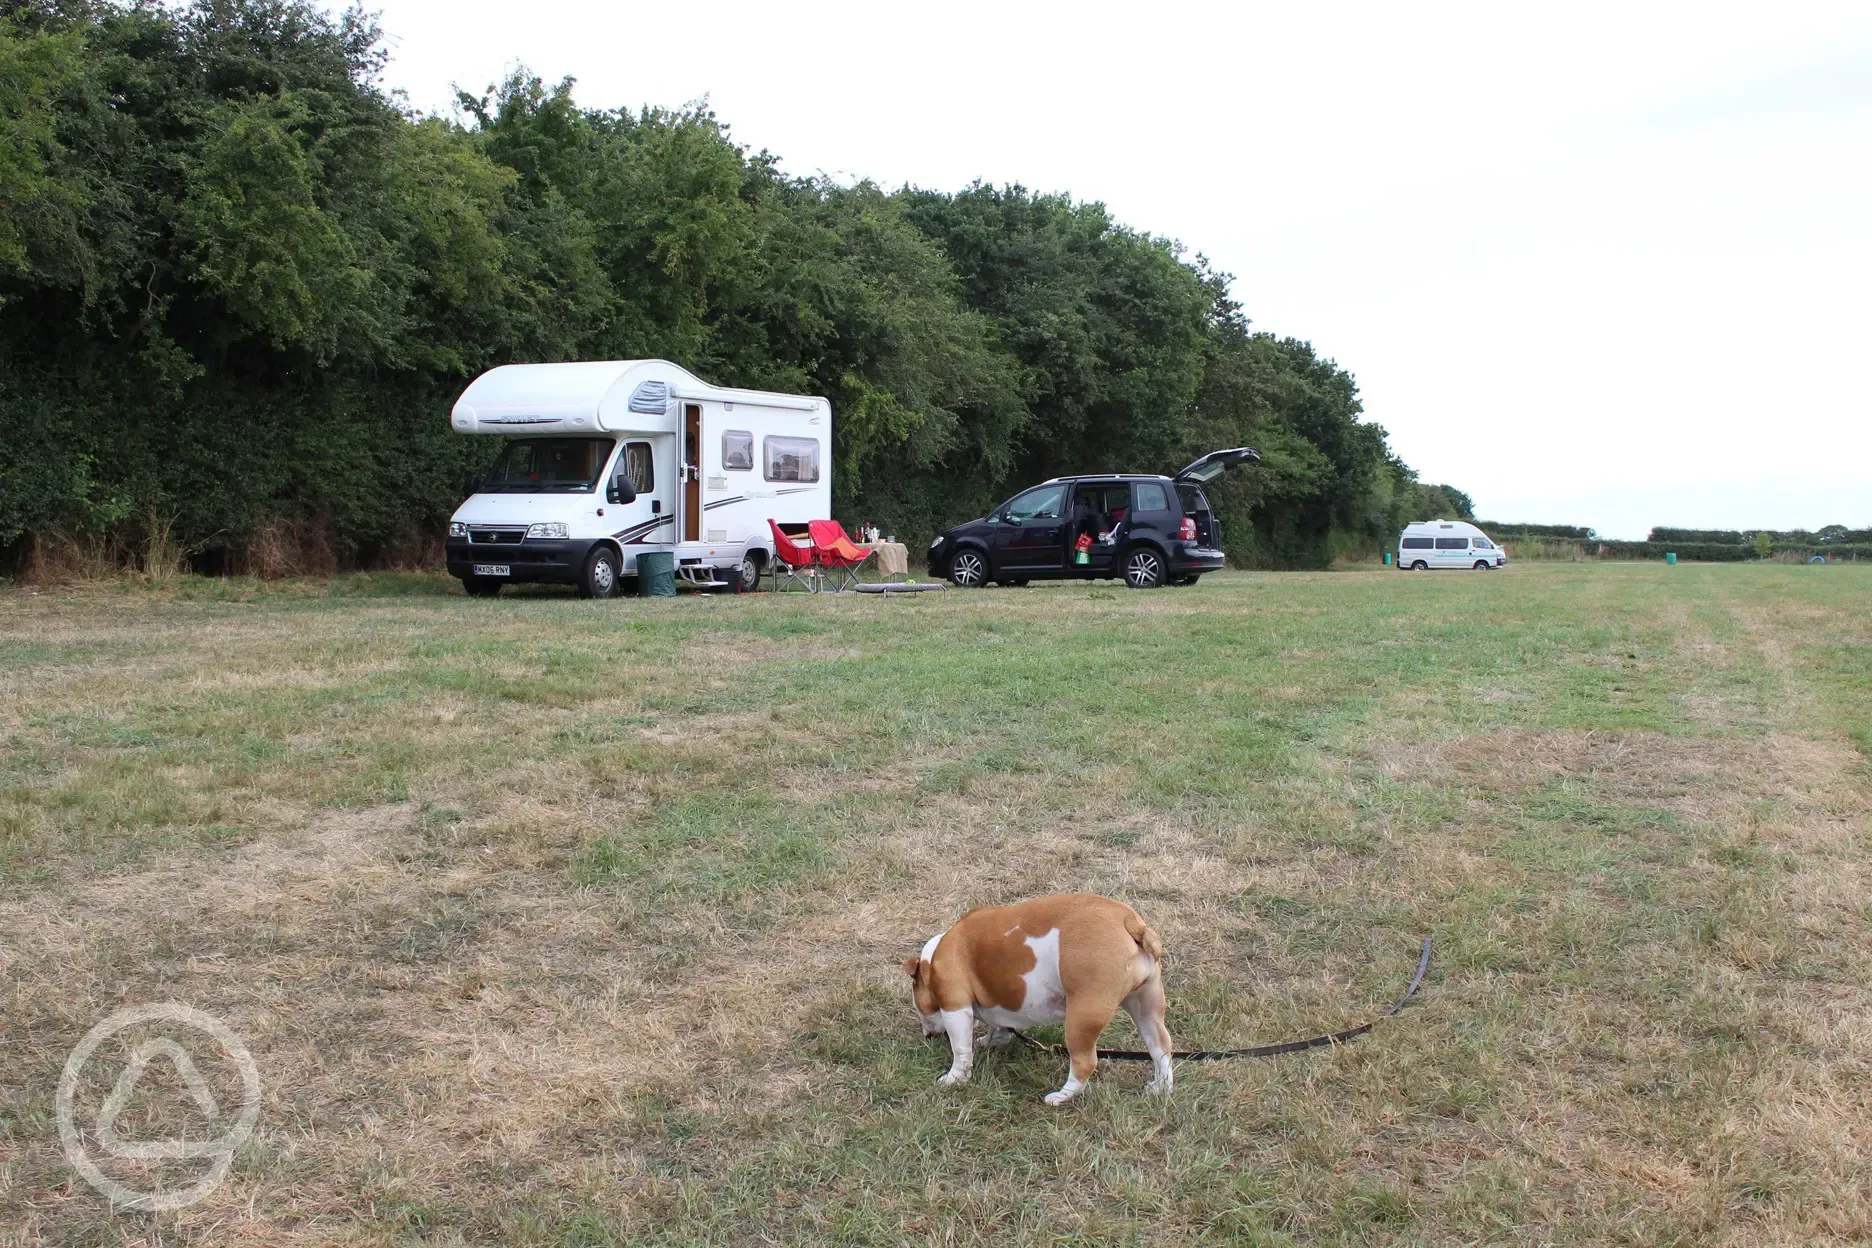 Plenty of Space in the Camping Field